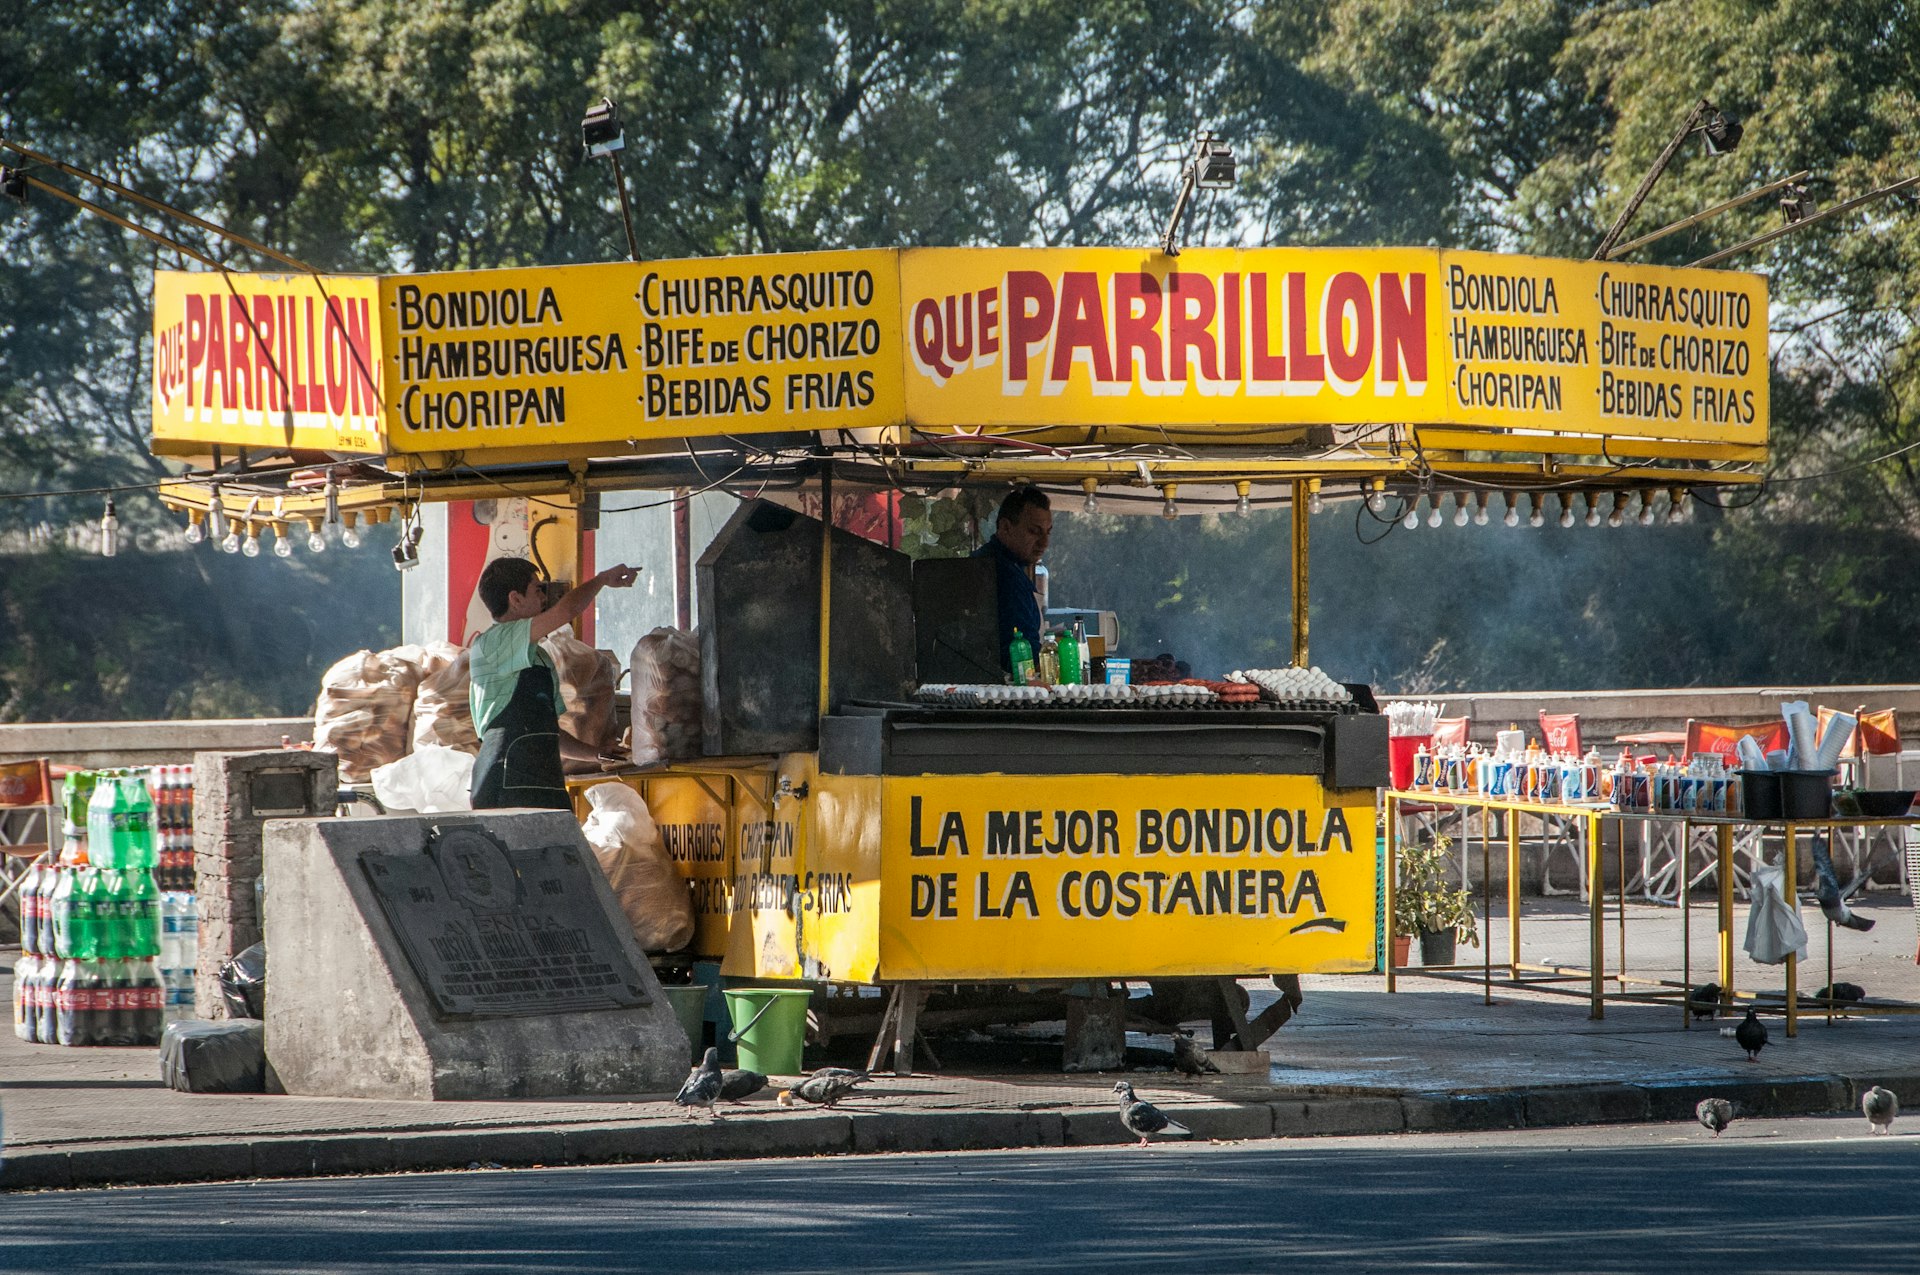 A parrilla or barbecue street food cart in the Puerto Madero district of Buenos Aires, Argentina